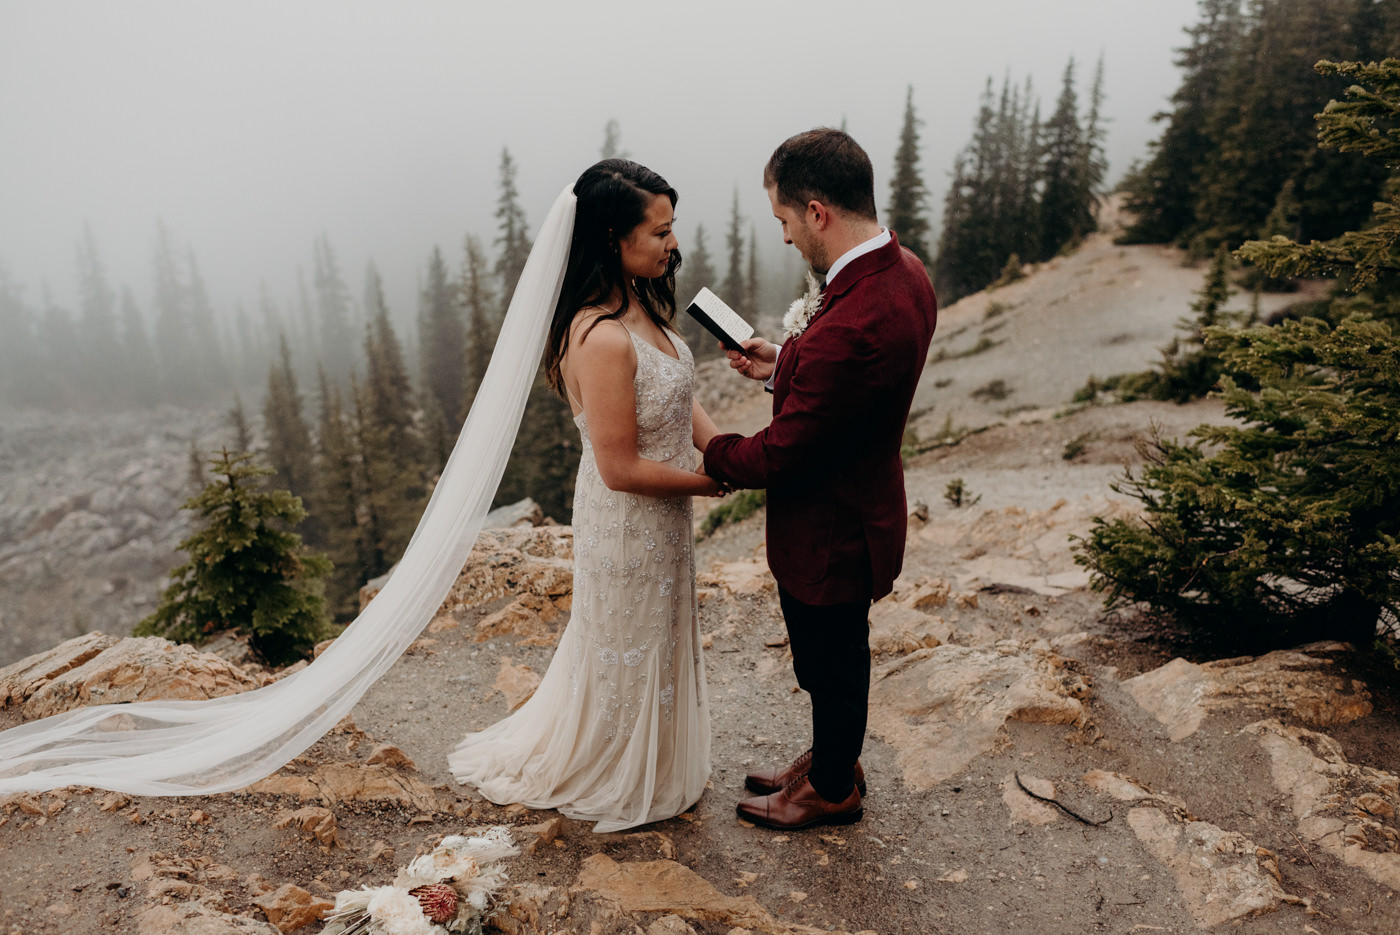 groom reads vows to bride on a rainy morning in Banff National Park